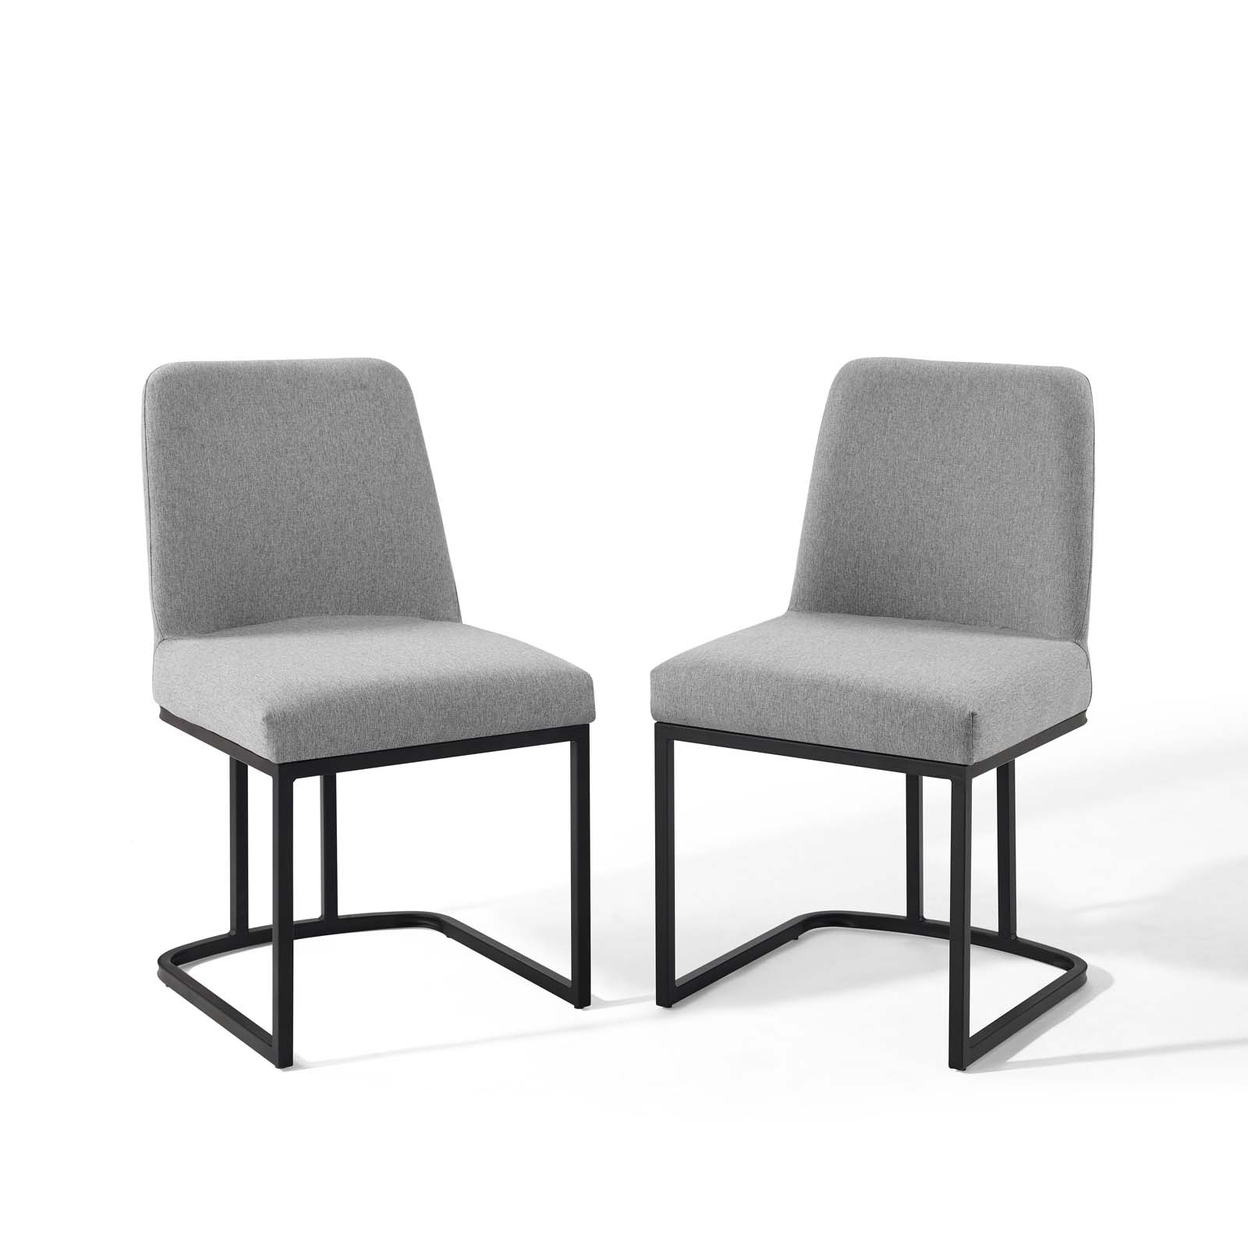 Amplify Sled Base Upholstered Fabric Dining Chairs - Set Of 2, Black Light Gray